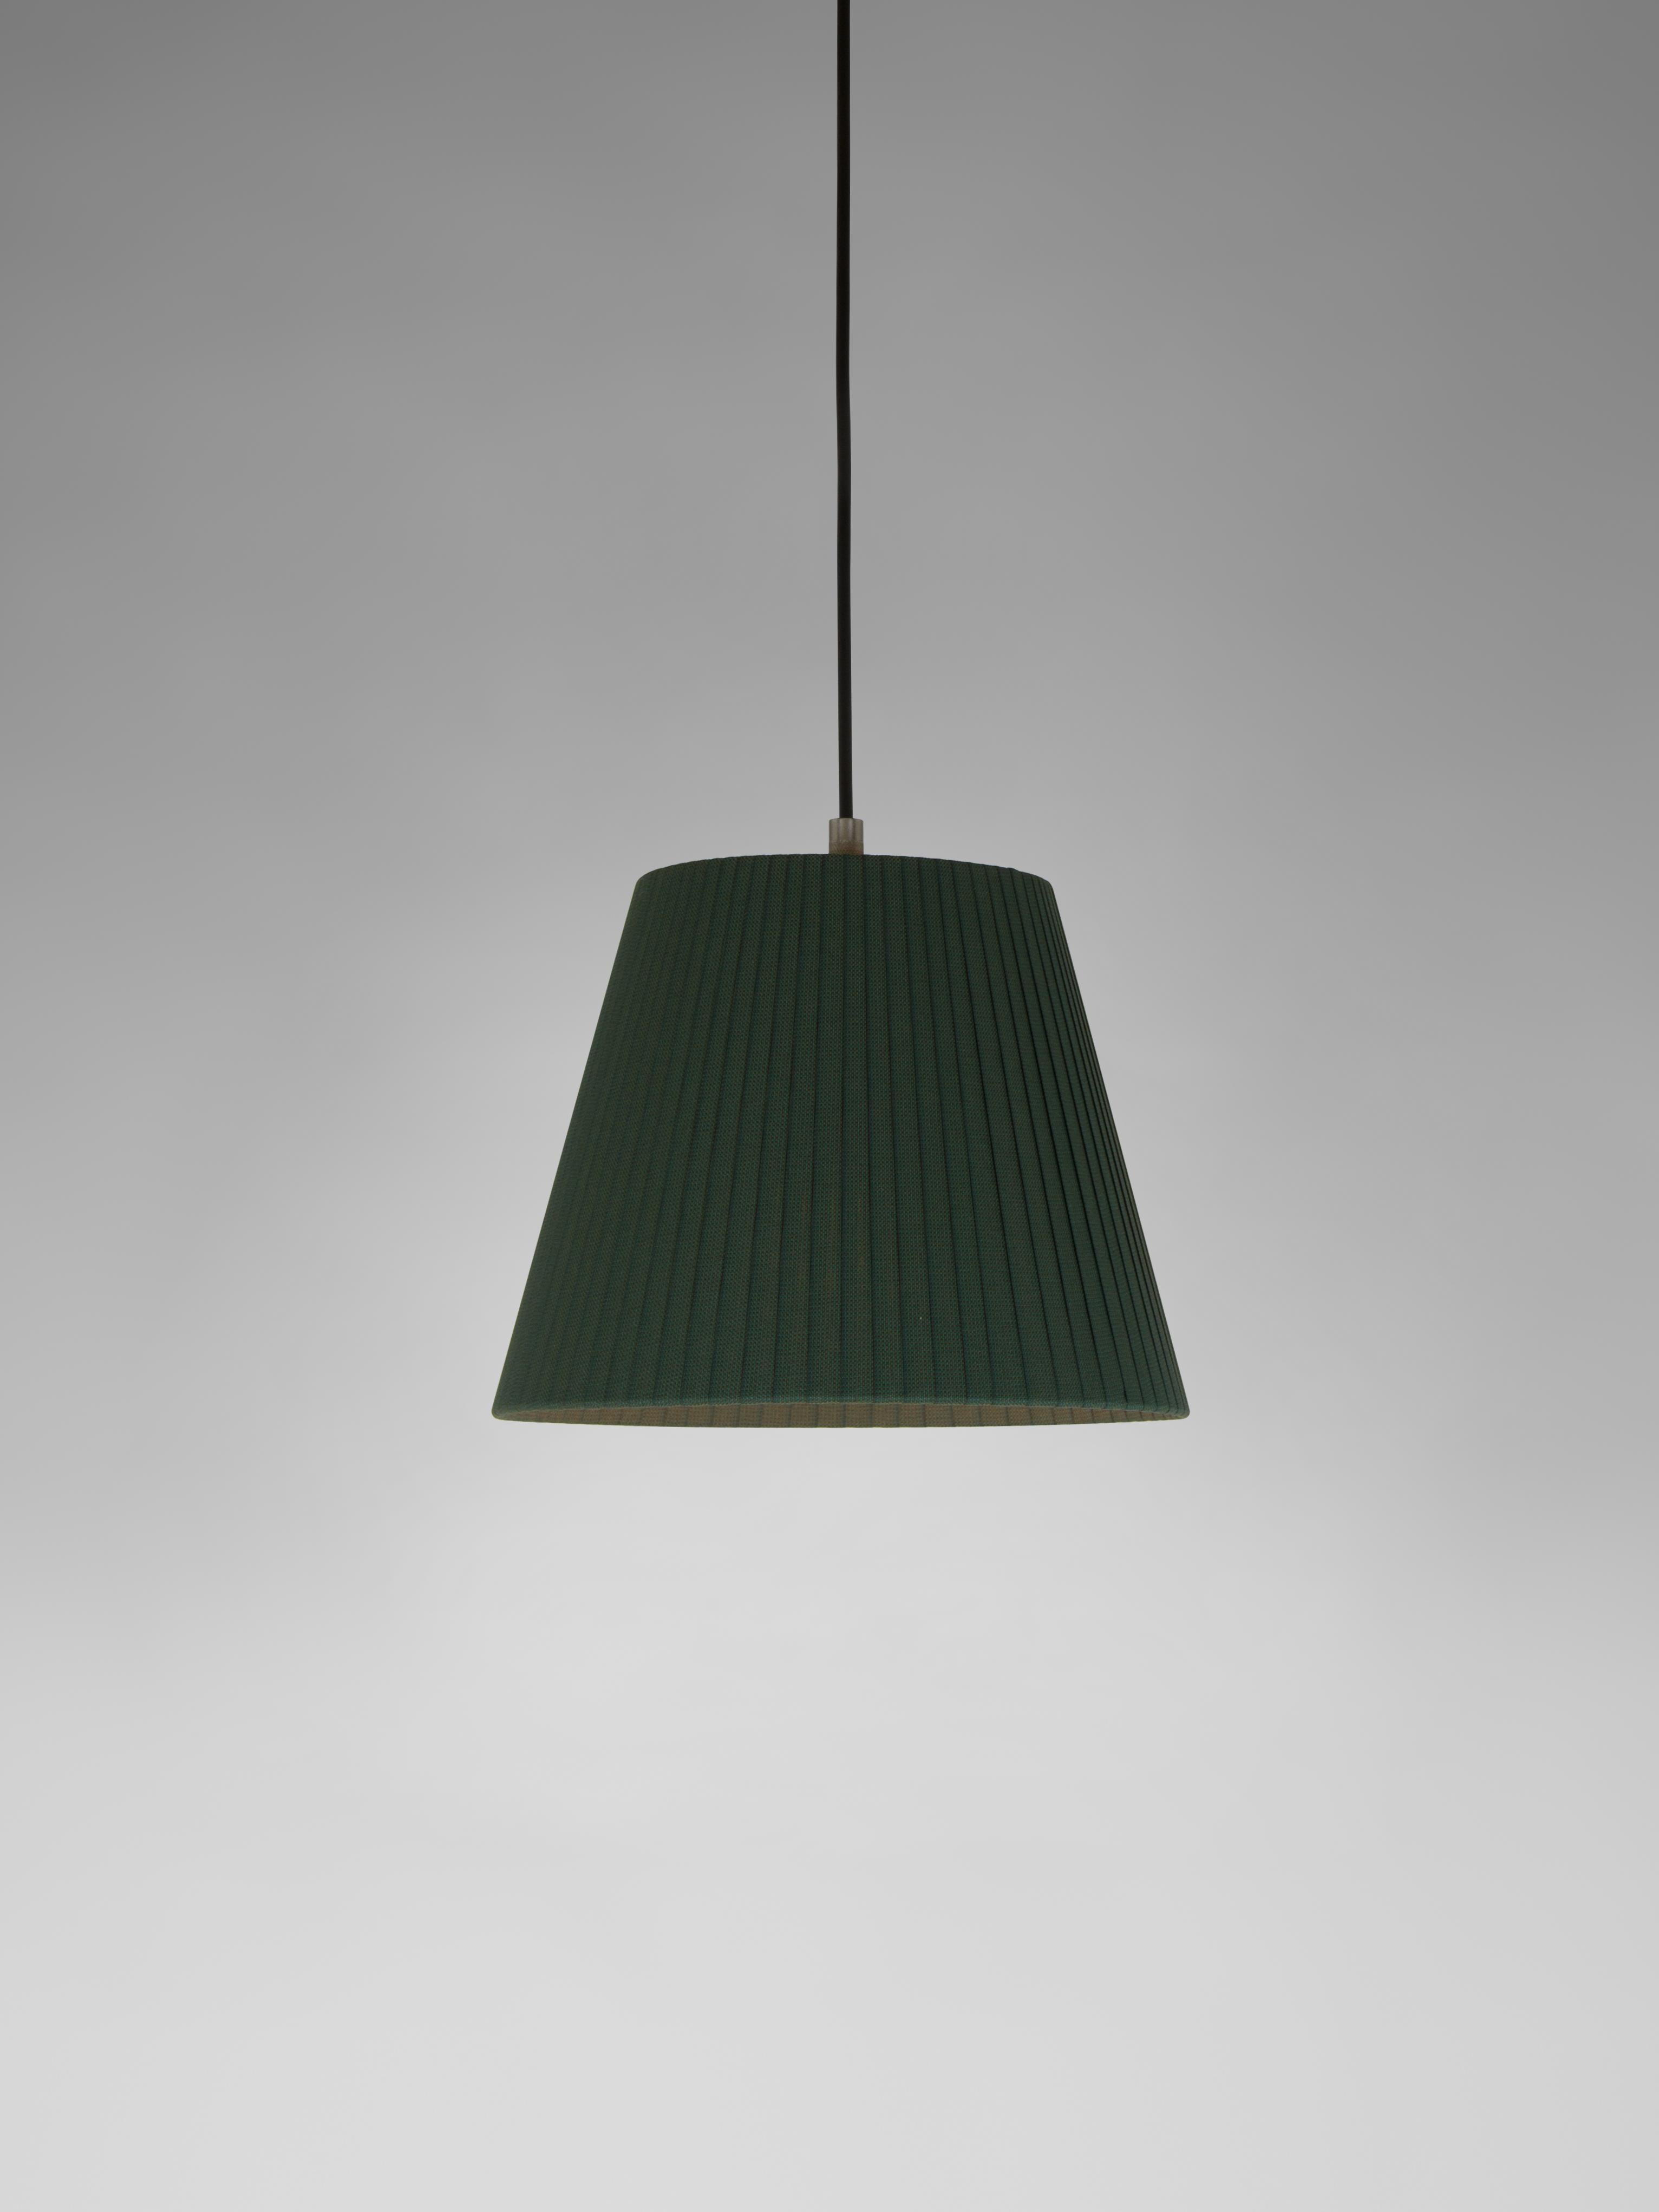 Green Sísísí Cónicas MT1 pendant lamp by Santa & Cole
Dimensions: D 25 x H 20 cm
Materials: Metal, ribbon.
Available in other colors.

The conical shape group has multiple finishes and sizes. It consists of four sizes: PT1, MT1, GT1 and GT3,